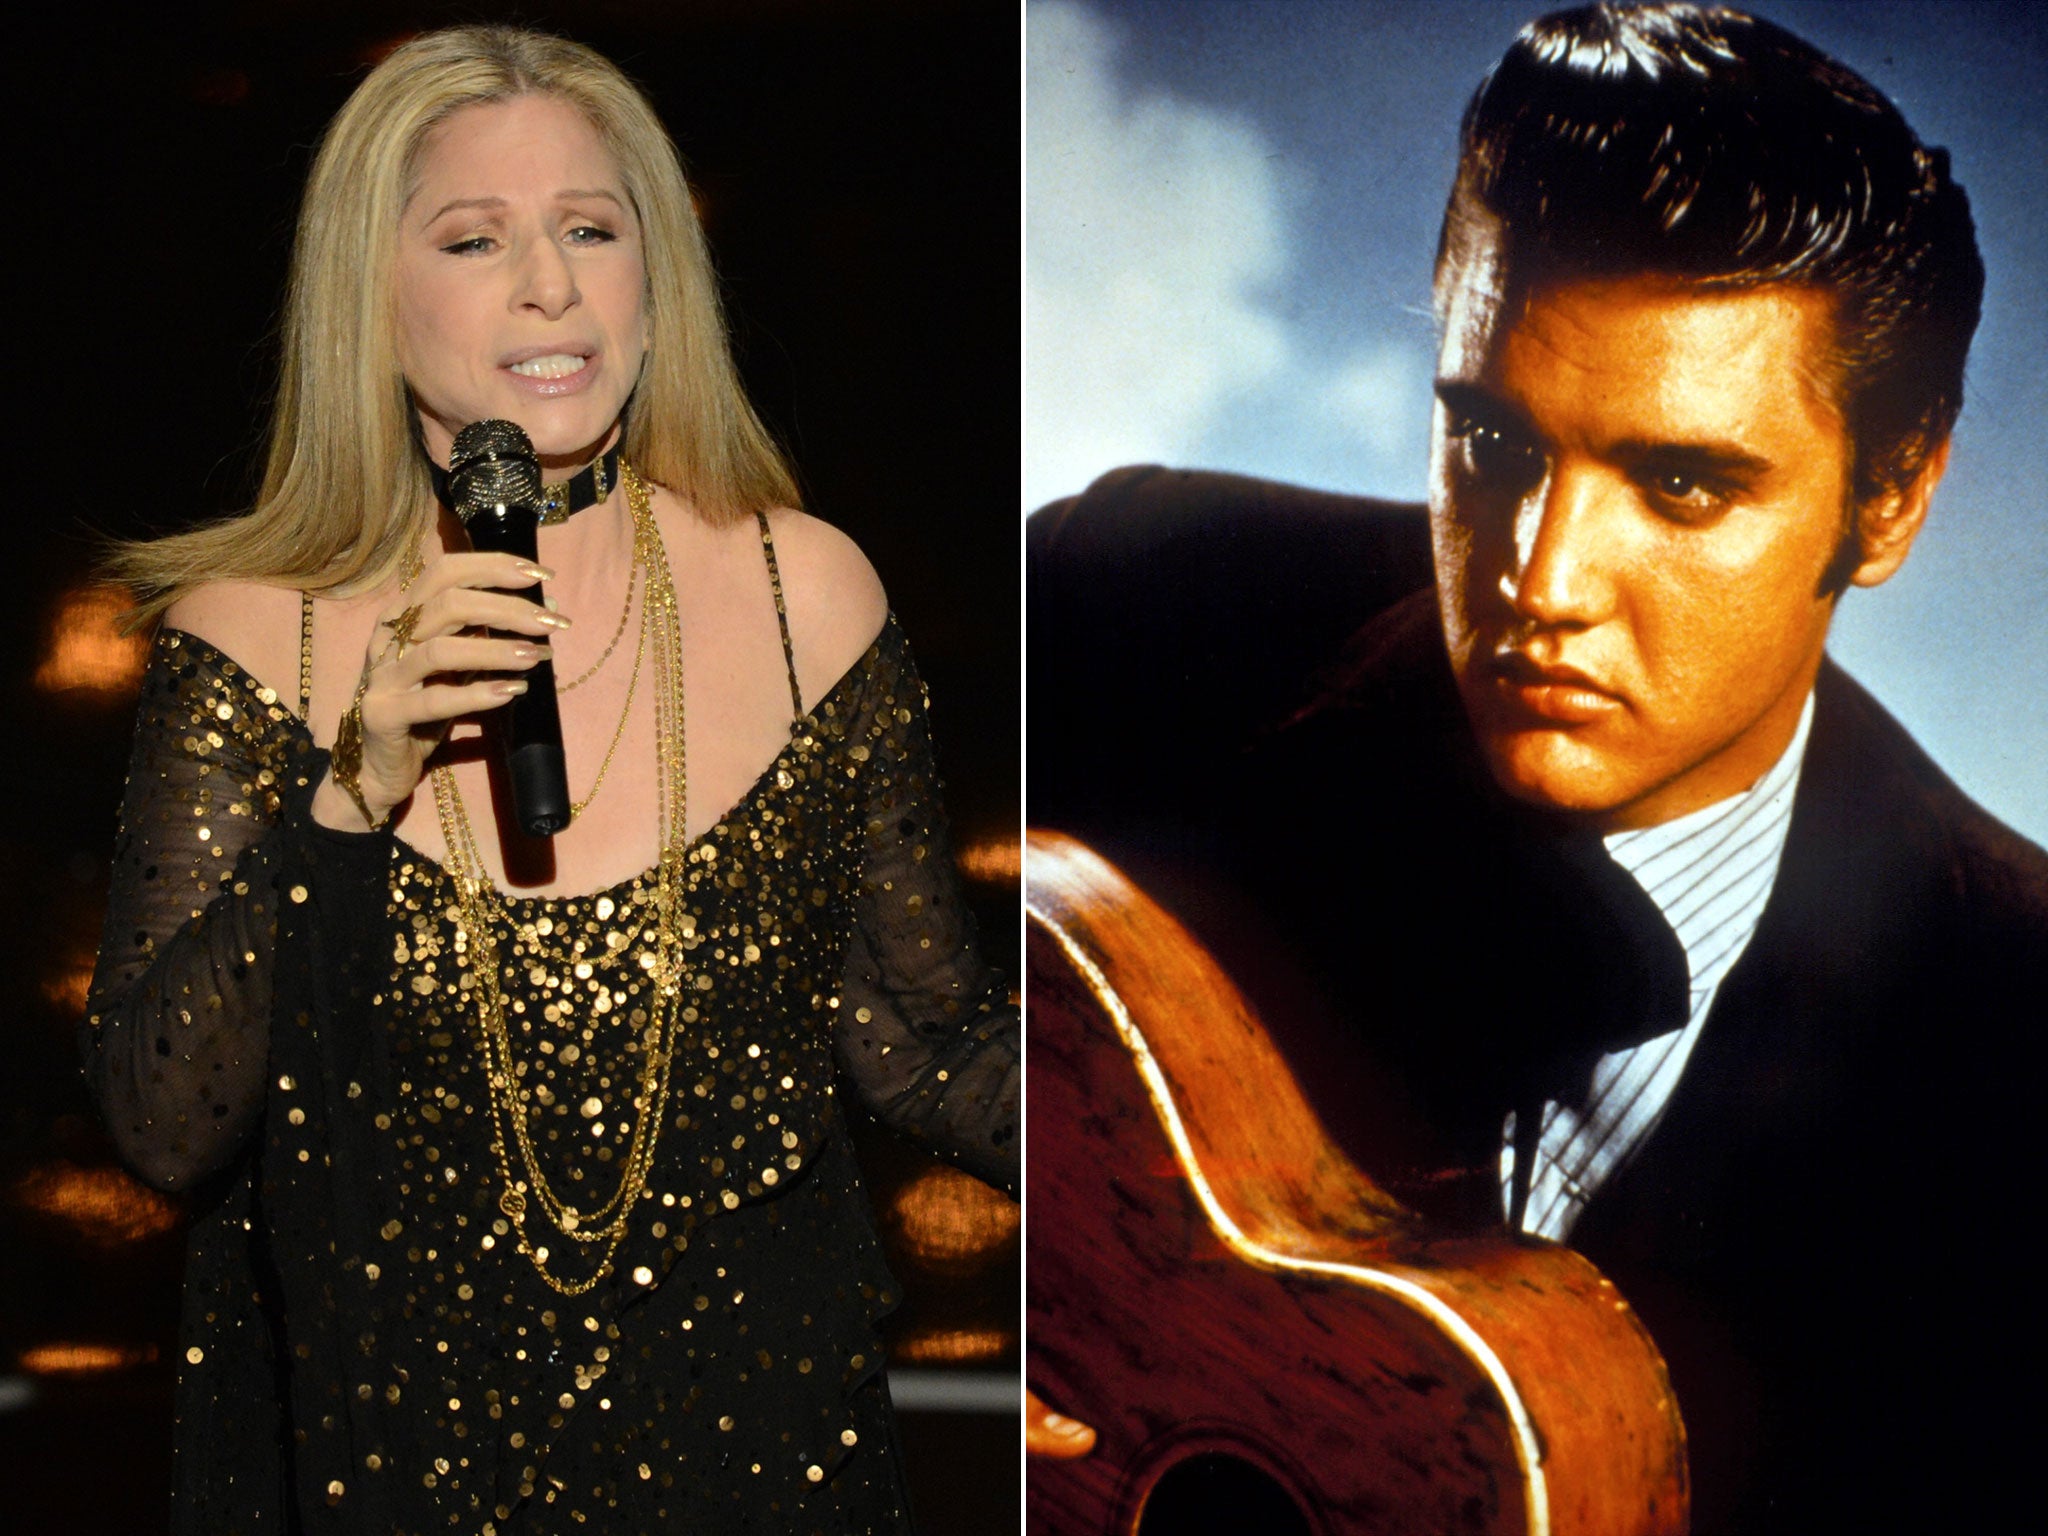 Elvis Presley will duet with Barbra Streisand from beyond the grave